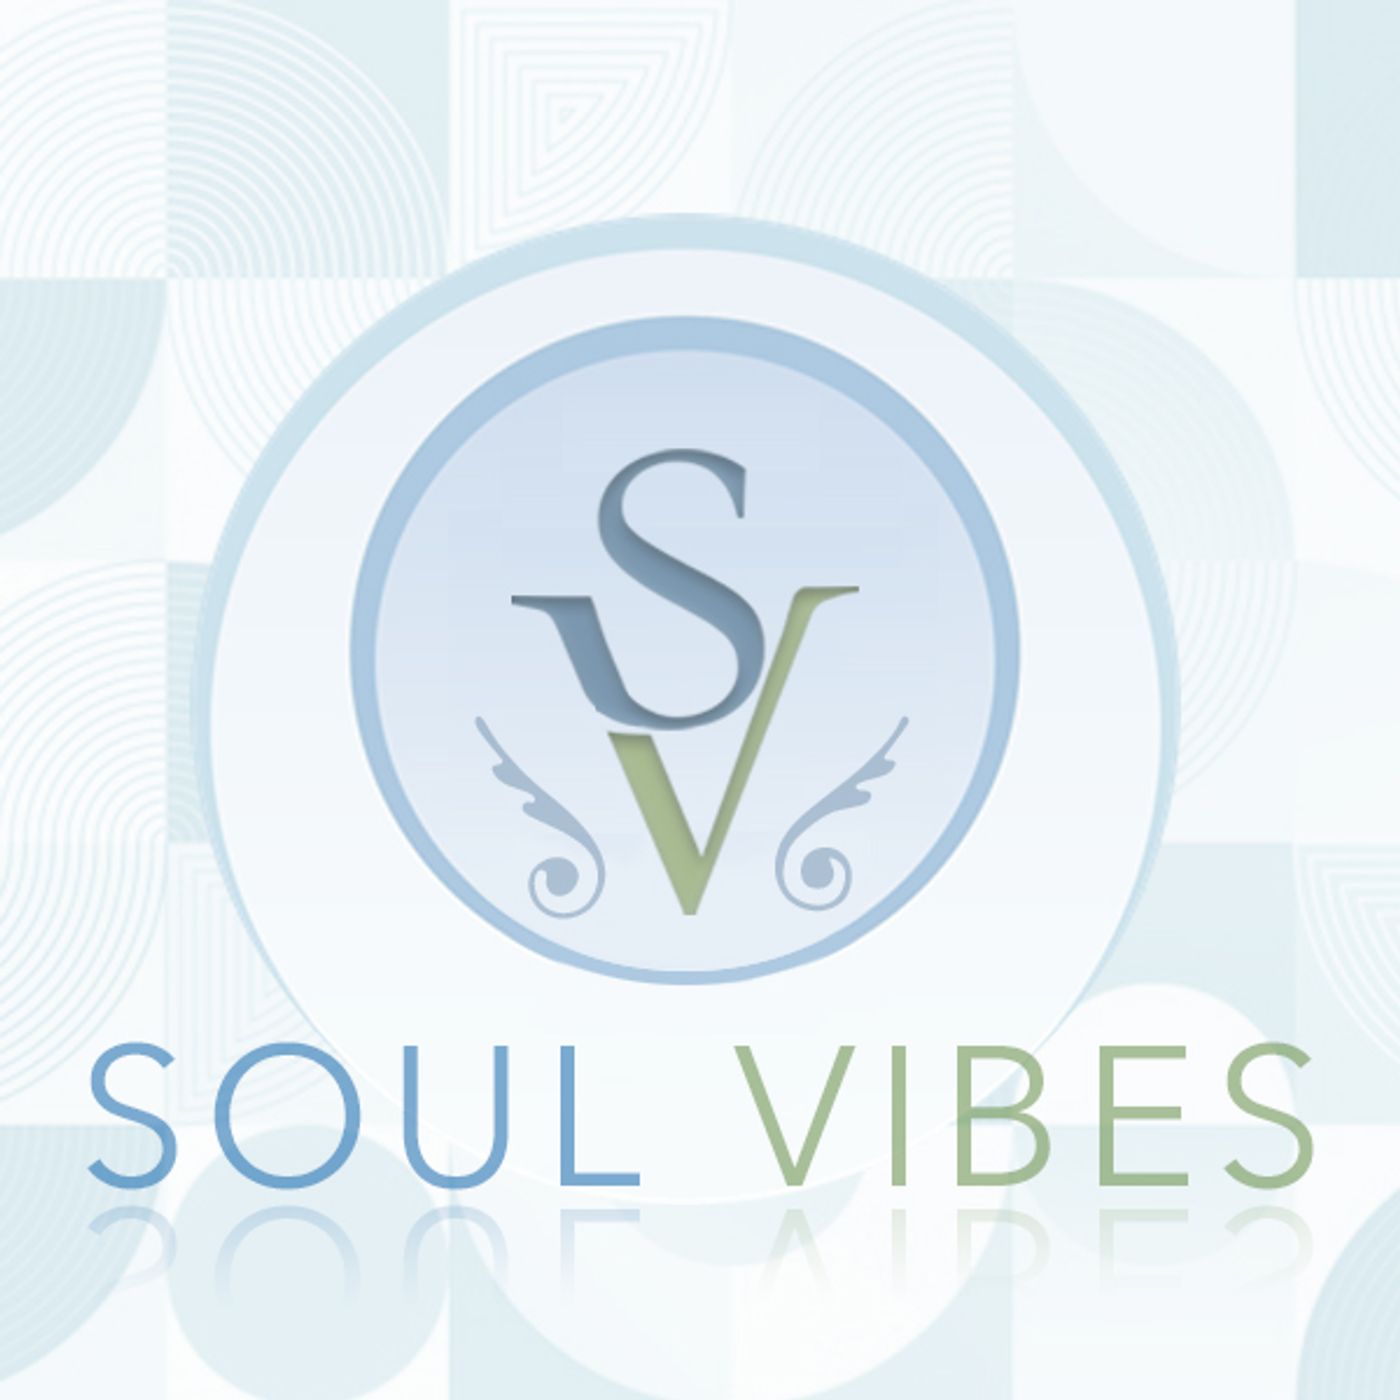 Soul Vibes: Compassion with Connection